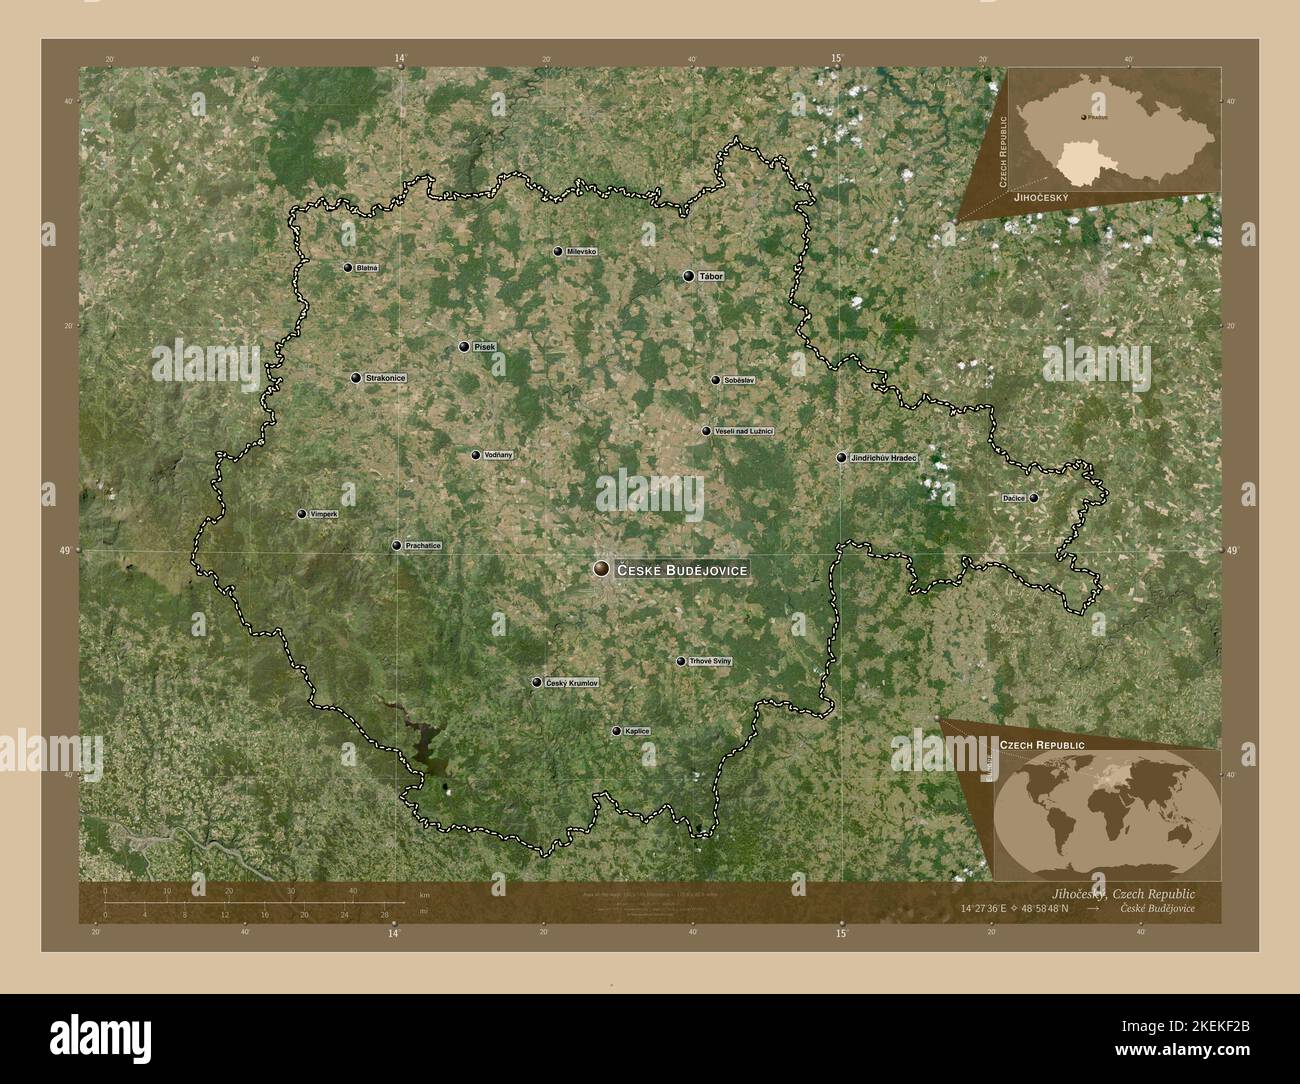 Jihocesky, region of Czech Republic. Low resolution satellite map. Locations and names of major cities of the region. Corner auxiliary location maps Stock Photo